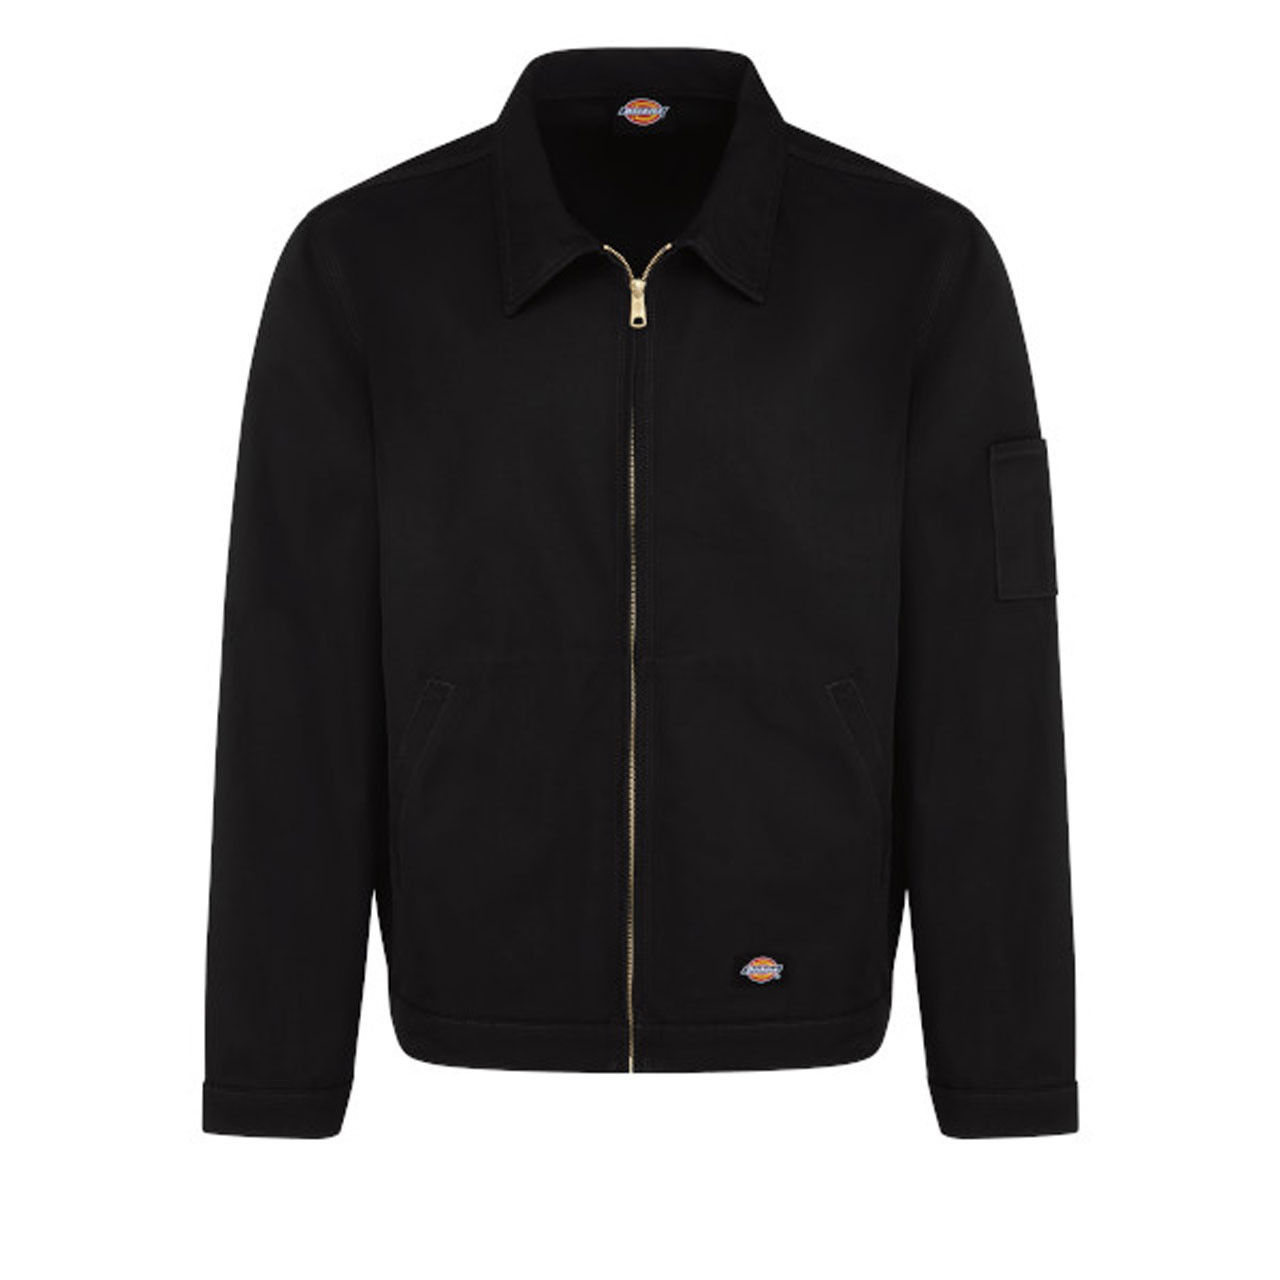 How many pockets does the Dickies Unlined Industrial Eisenhower Jacket have?